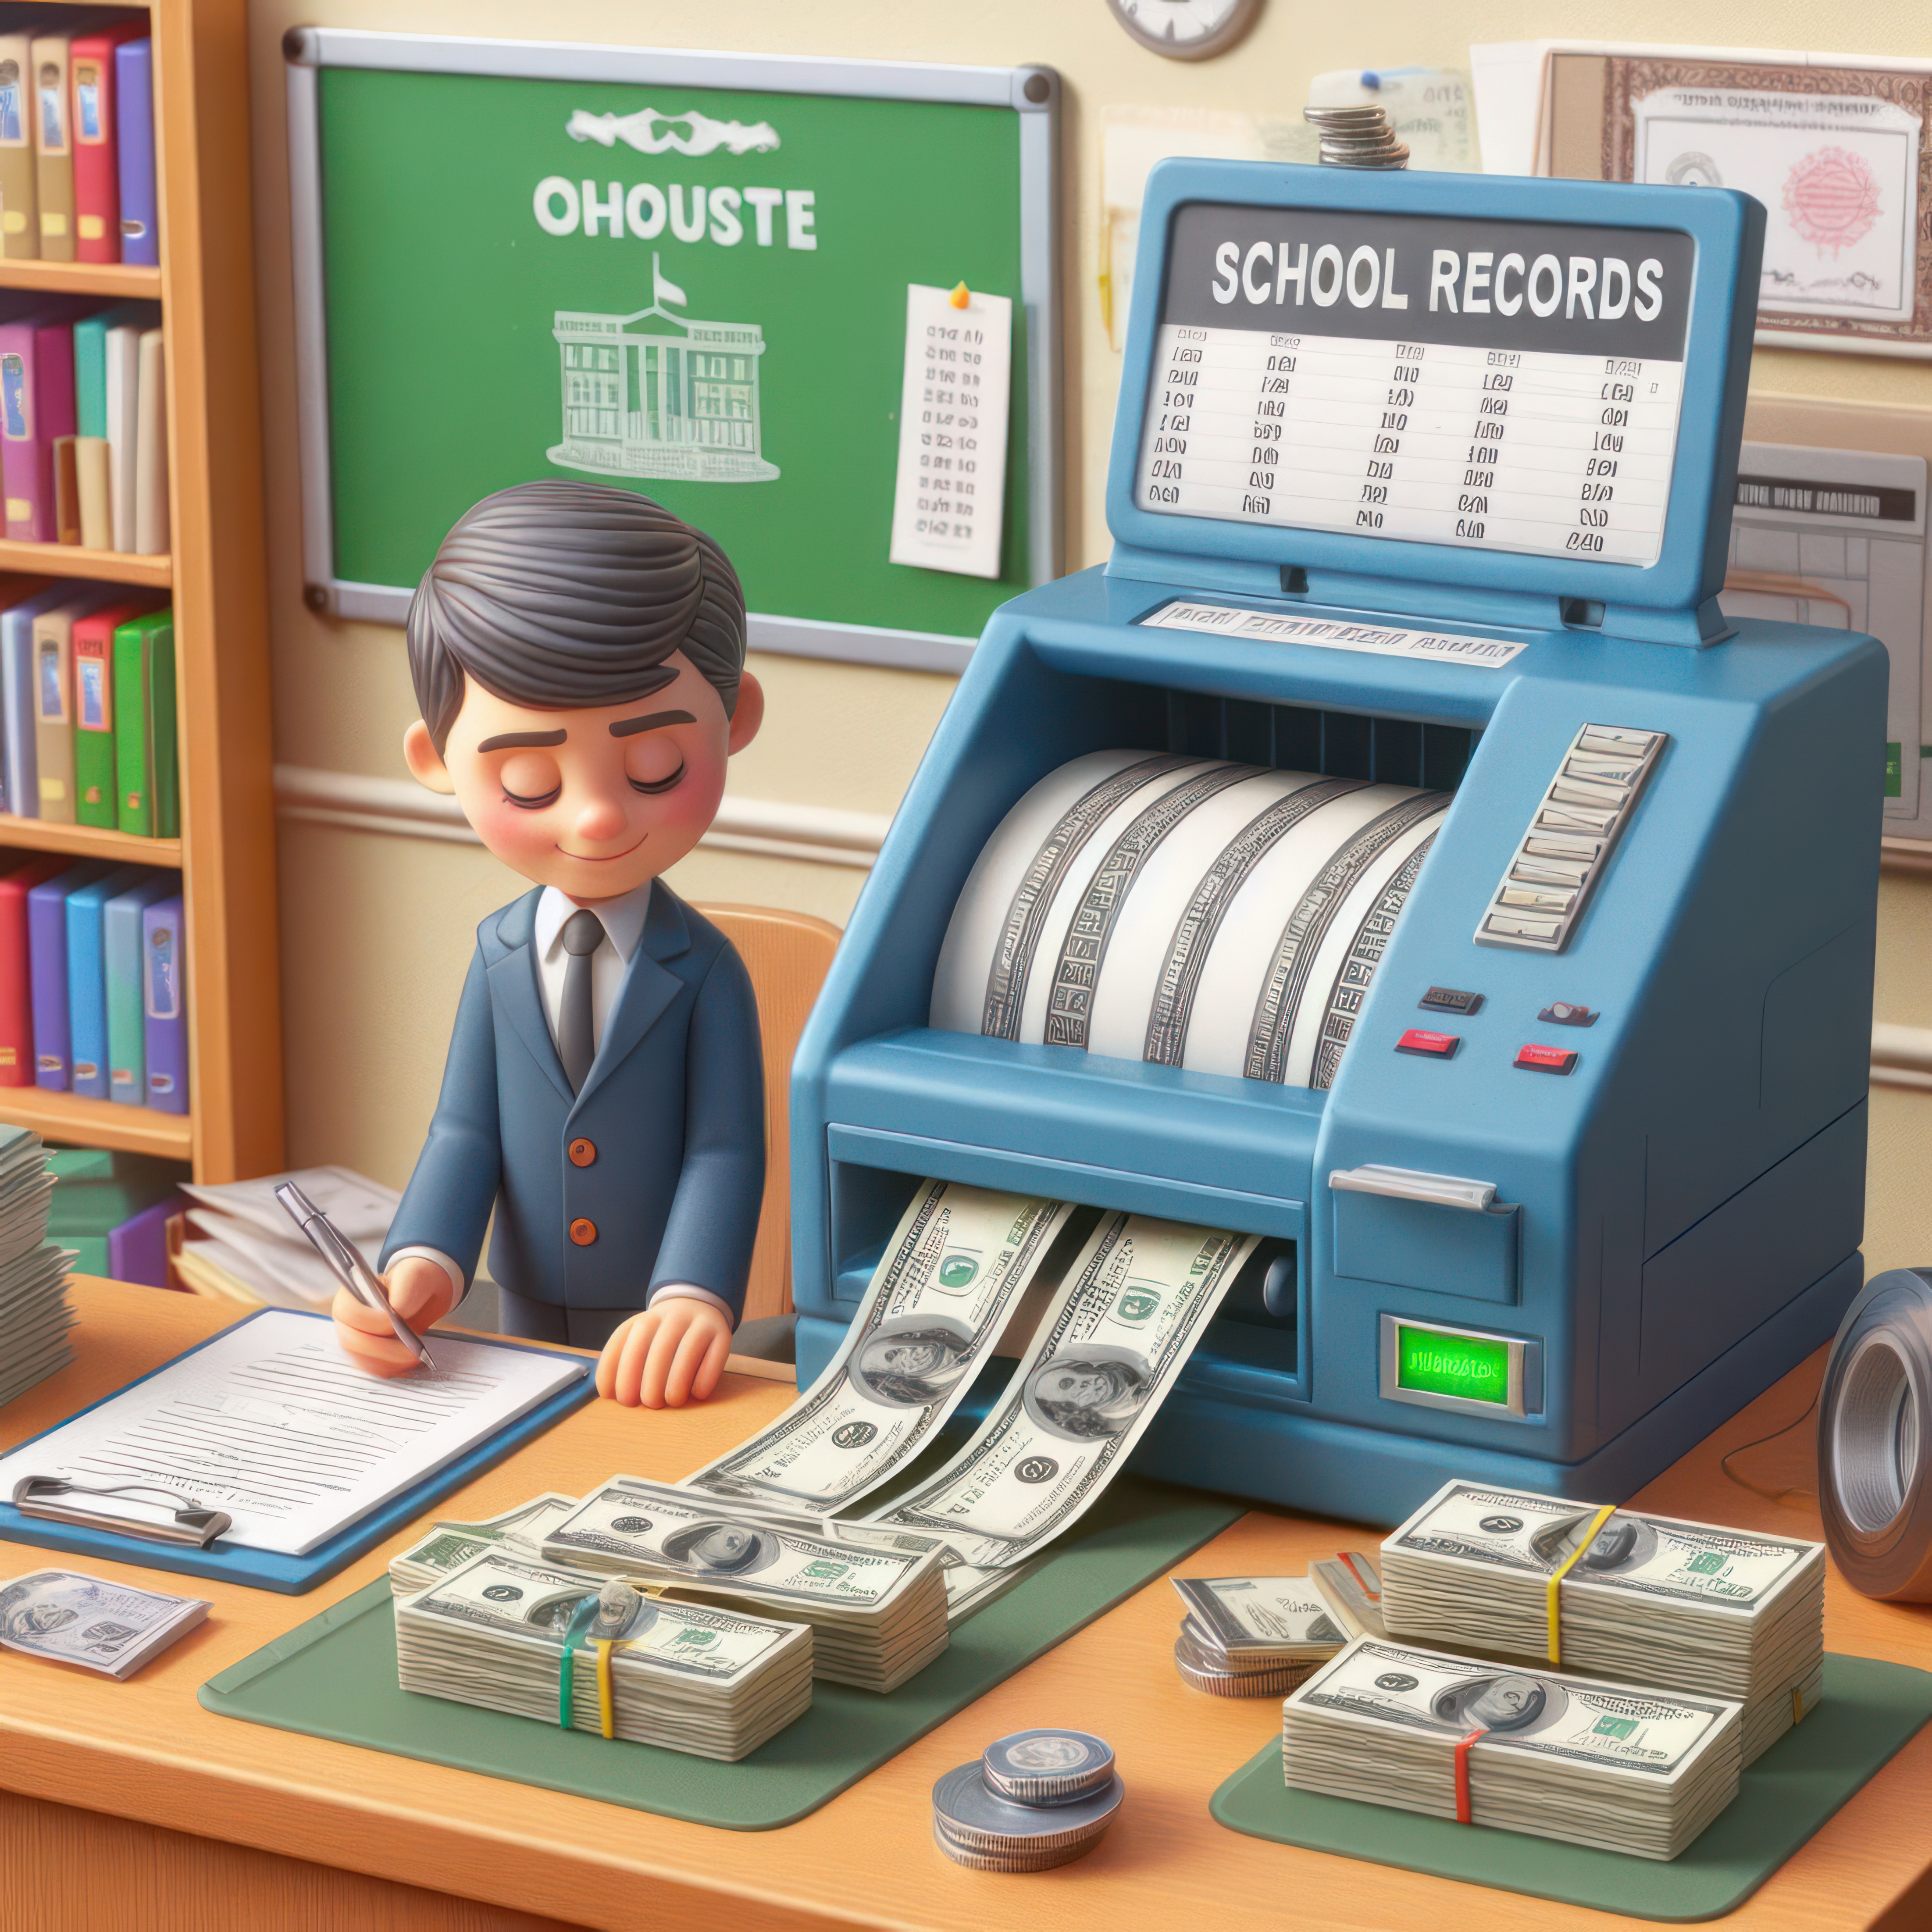 Printing Out Money in the School Records Office